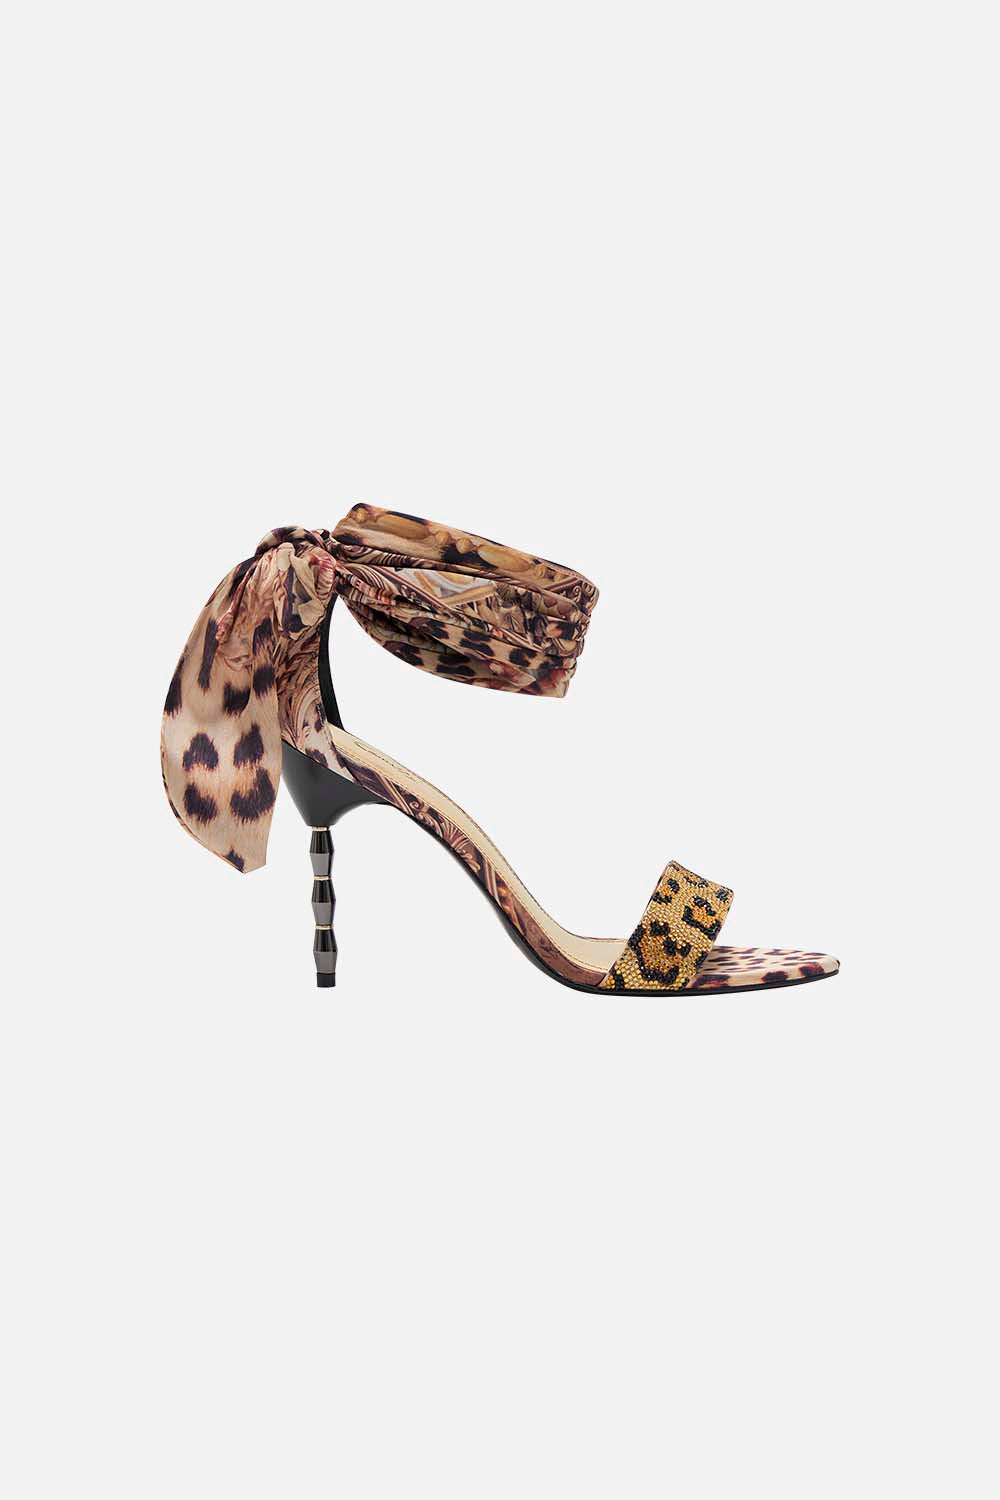 Product view of CAMILLA leopard print heels in Standing Ovation print